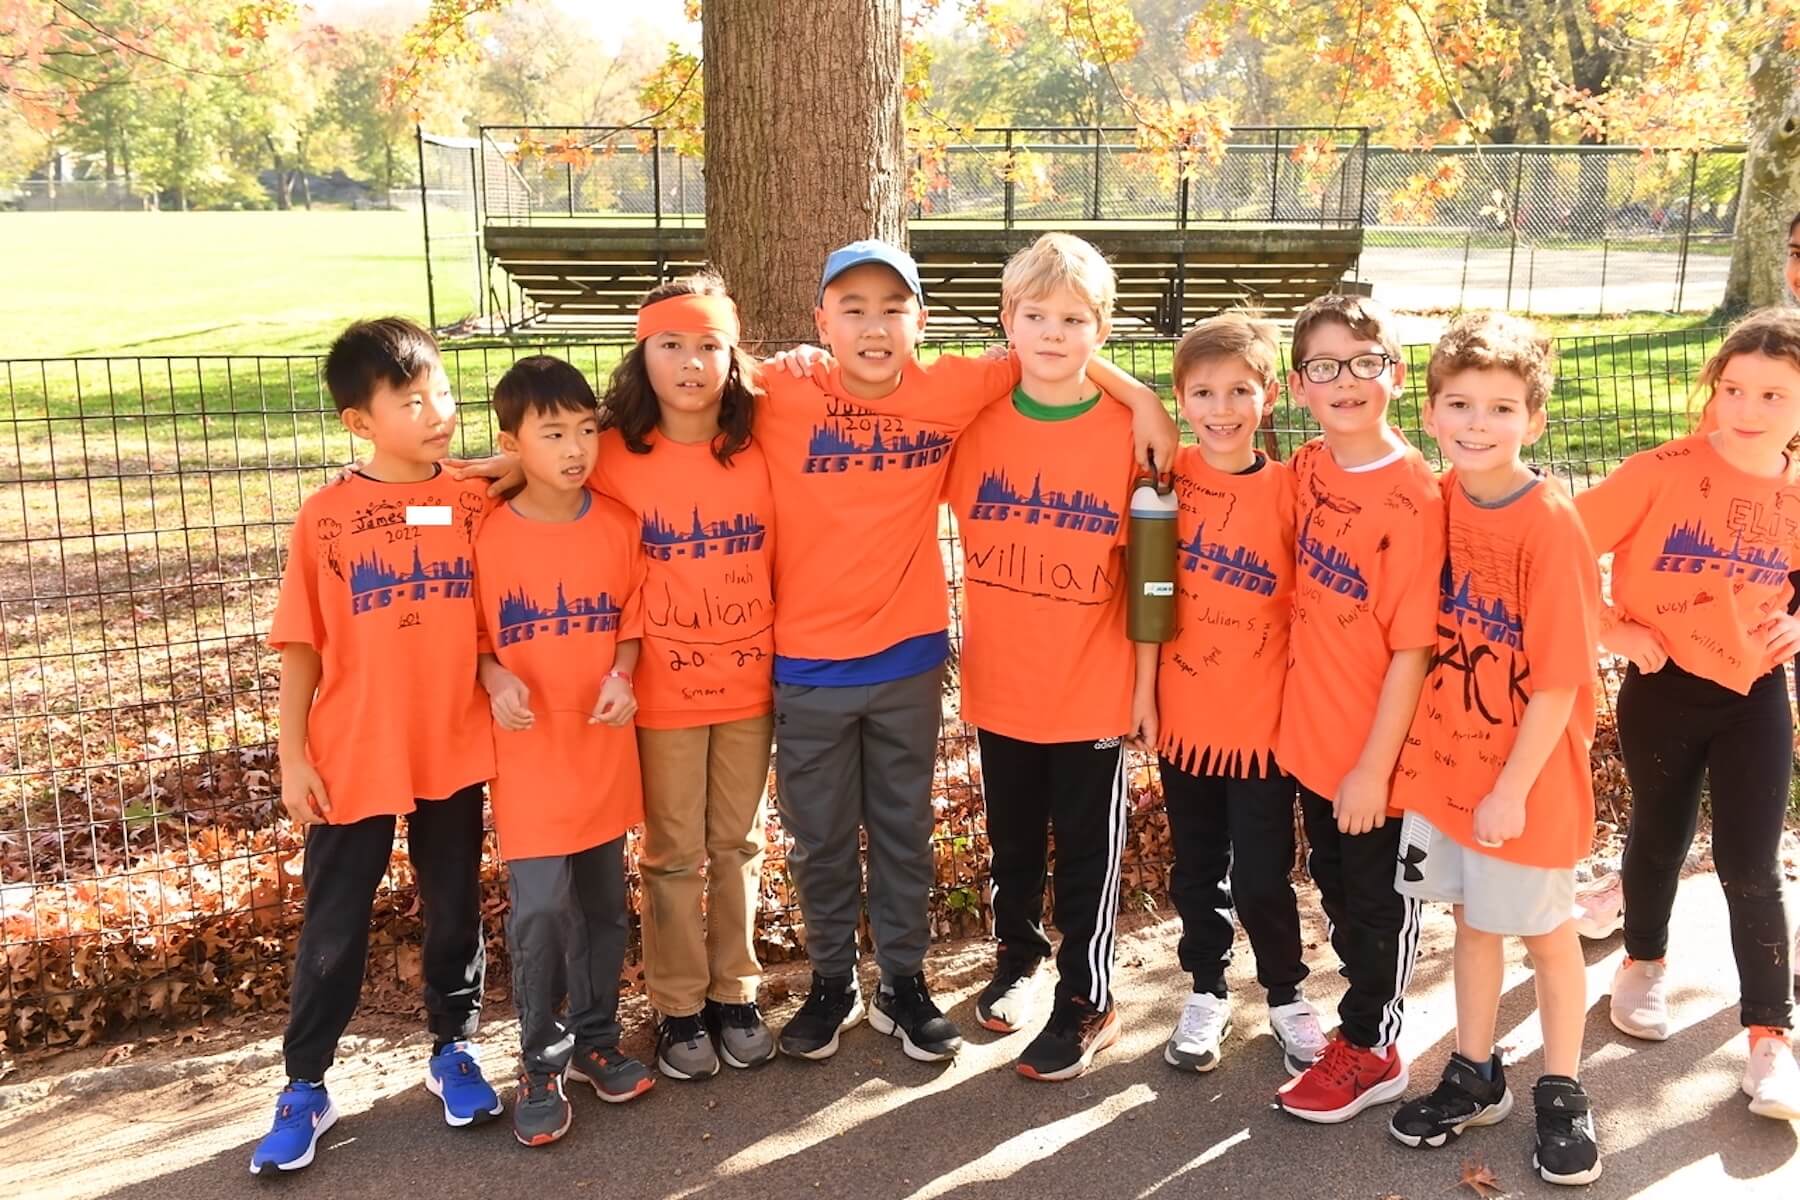 Group of students poses in front of a fence in Central Park. They are all wearing their orange ECS-a-Thon shirts.